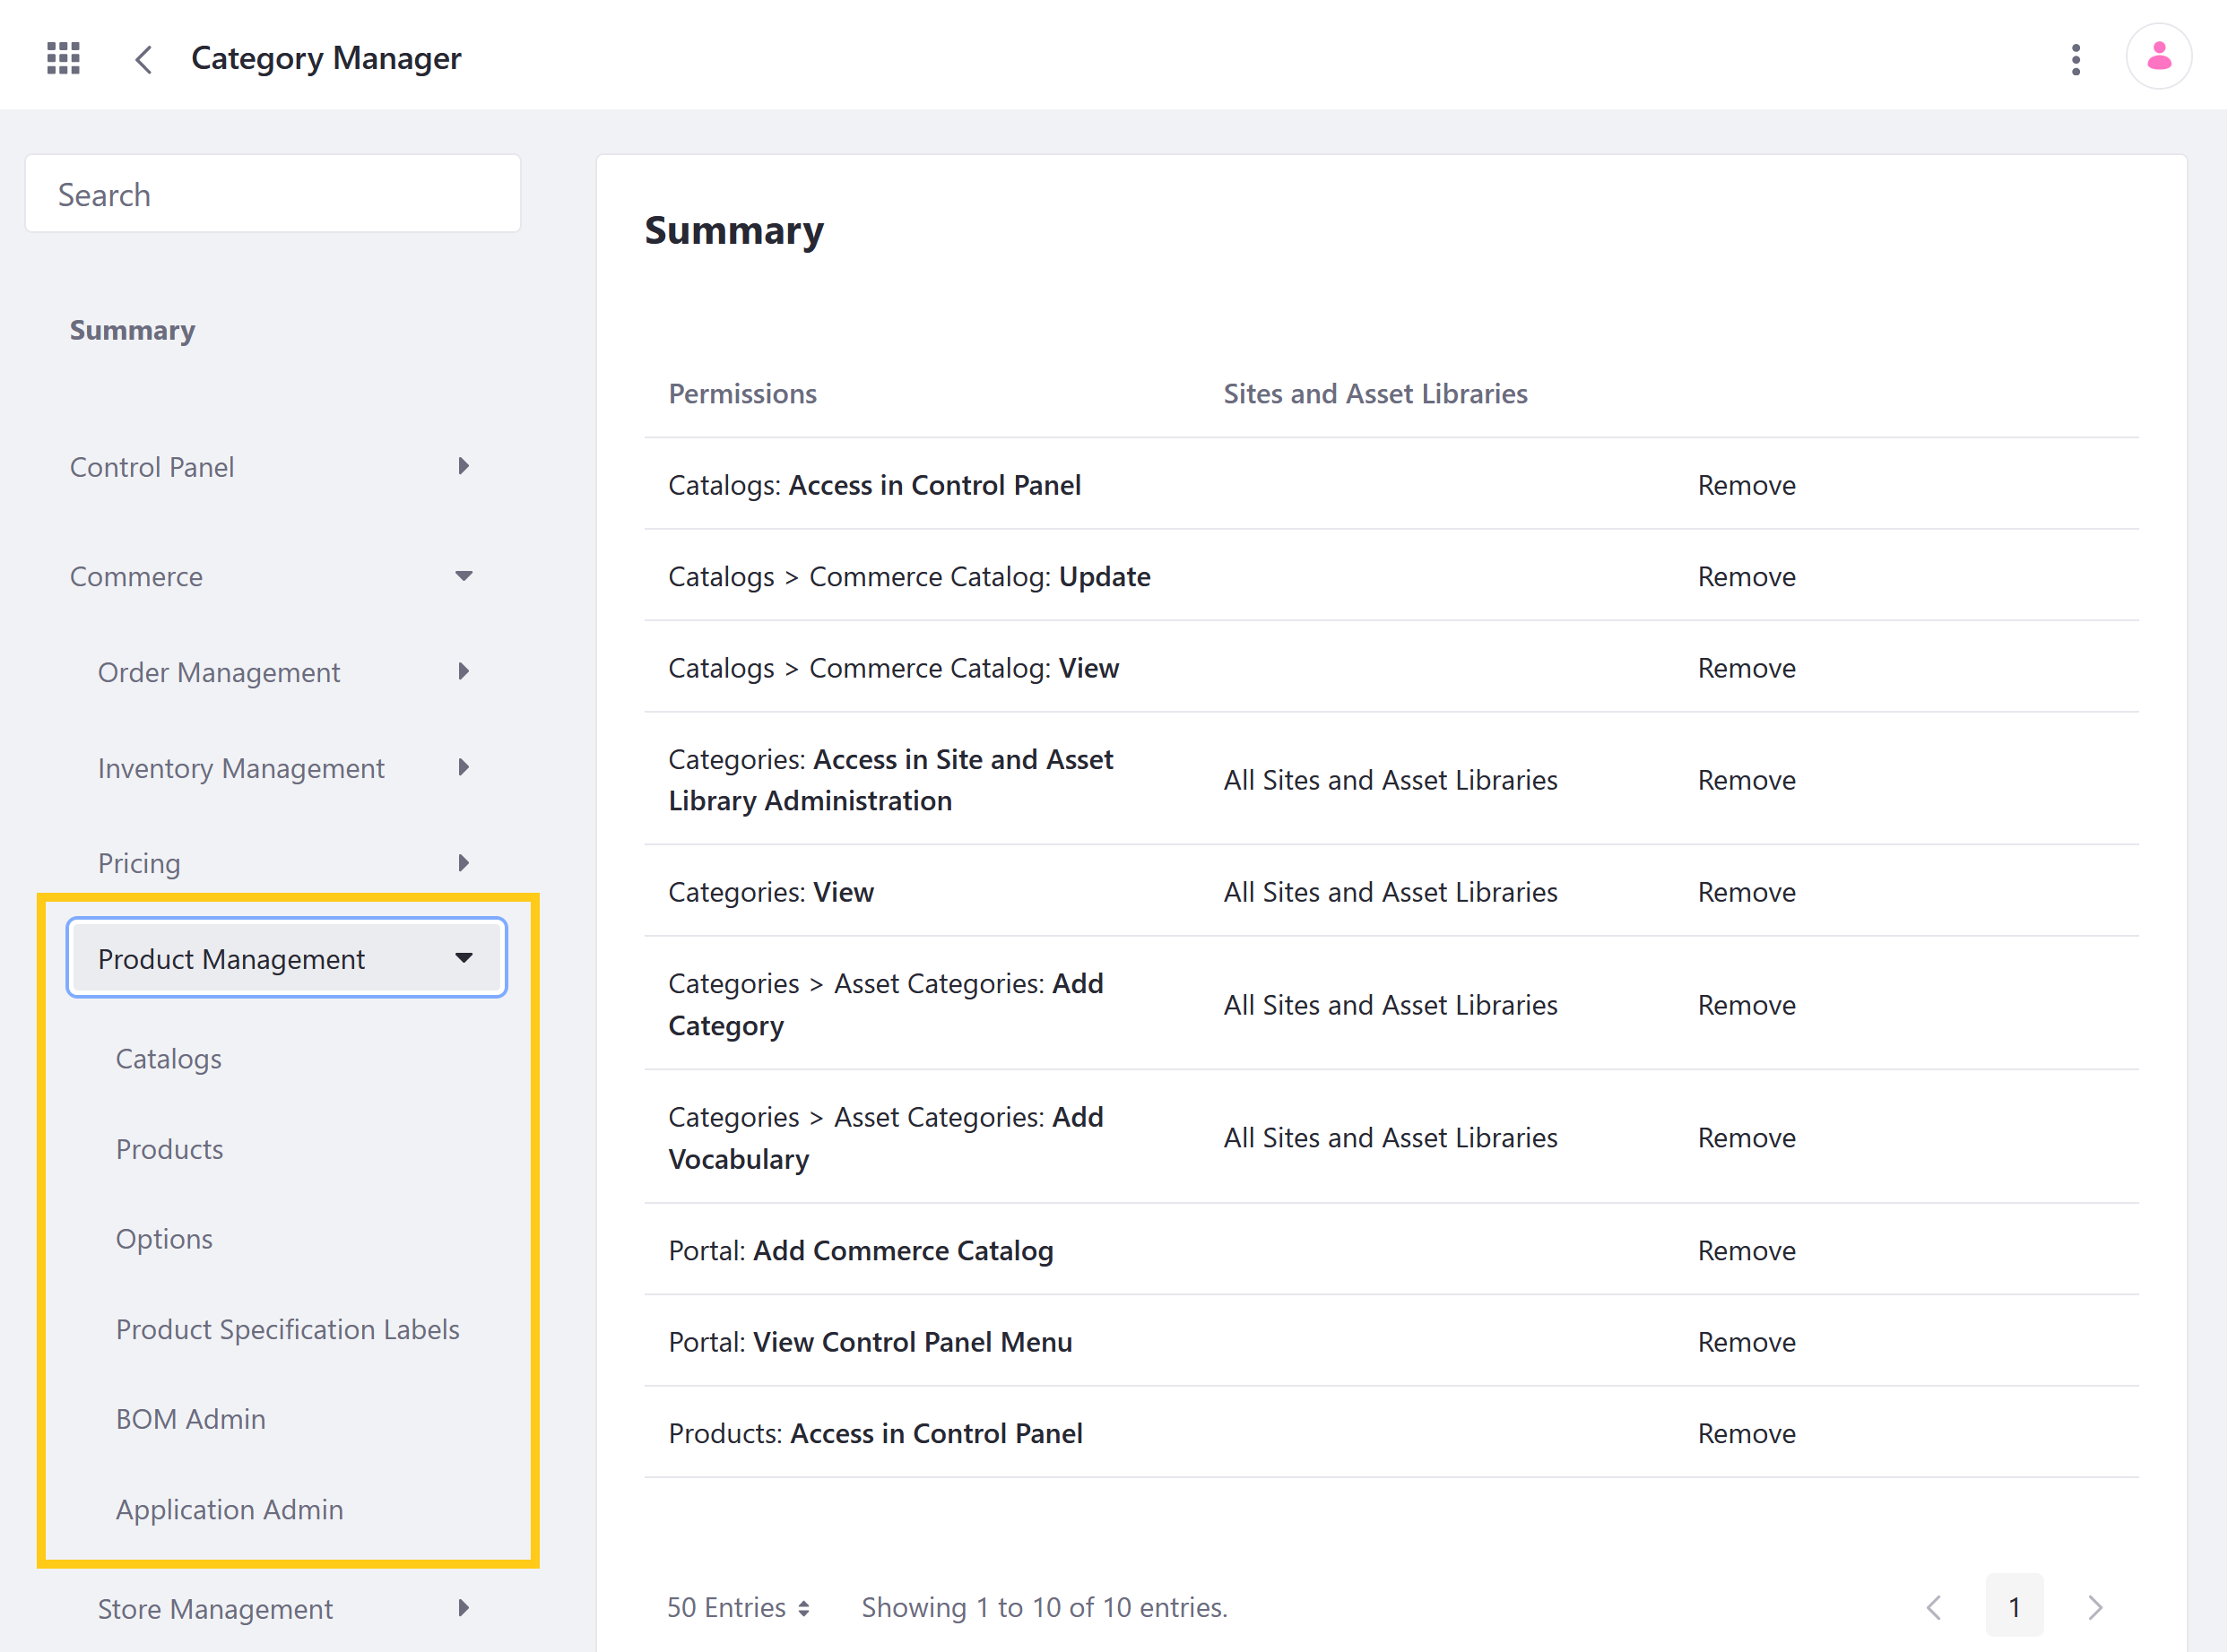 Manage Product Management permissions for user roles in the Define Permissions tab.